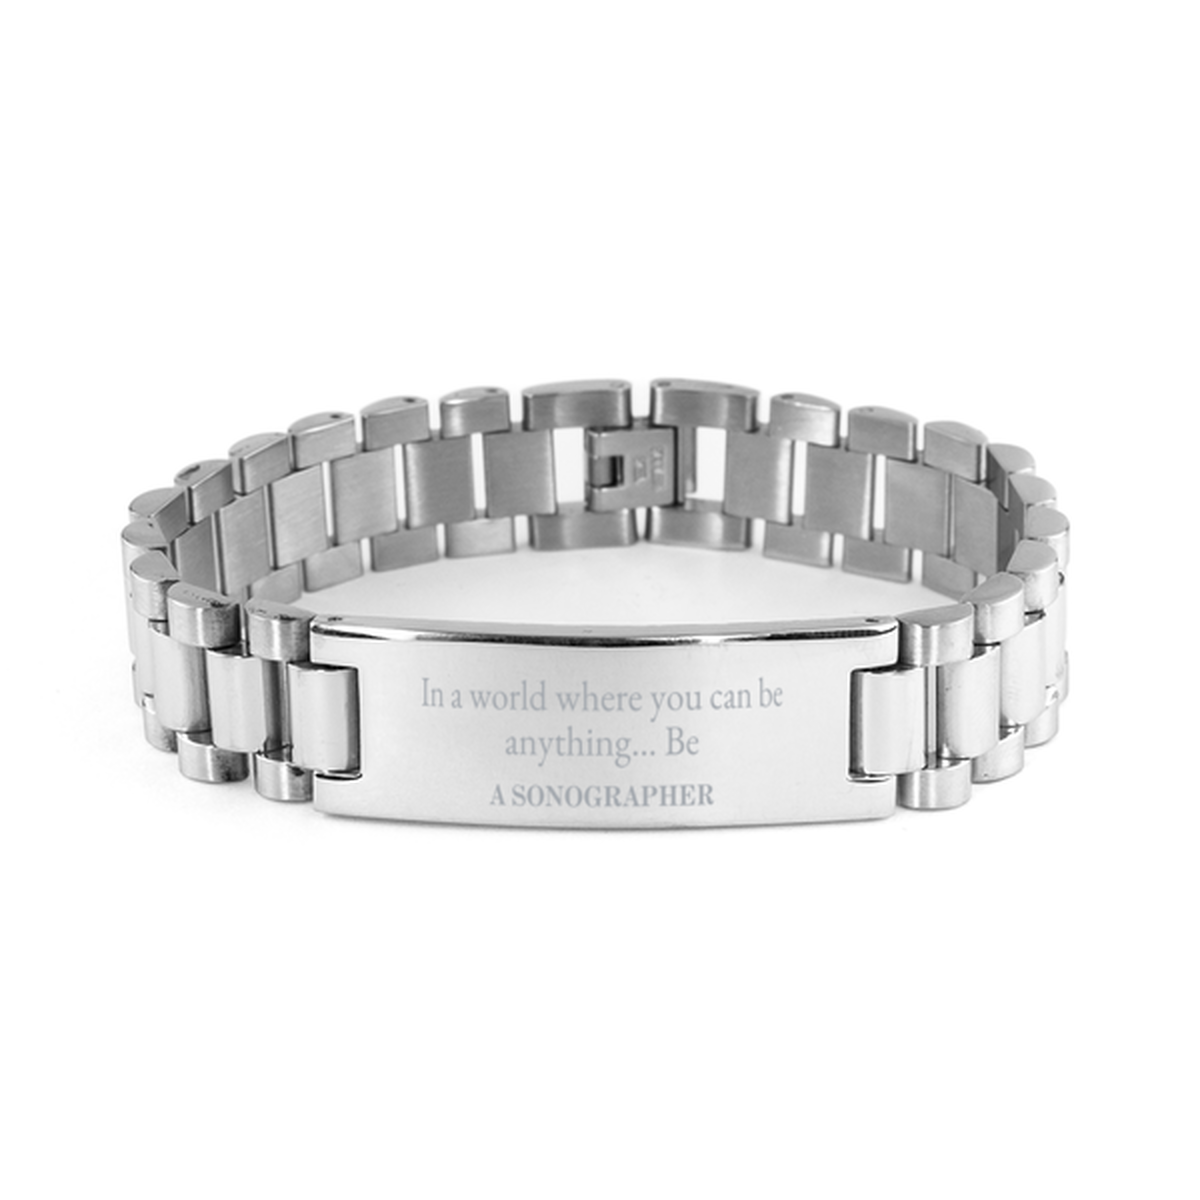 Gifts for Sonographer, In a world where you can be anything, Appreciation Birthday Ladder Stainless Steel Bracelet for Men, Women, Friends, Coworkers